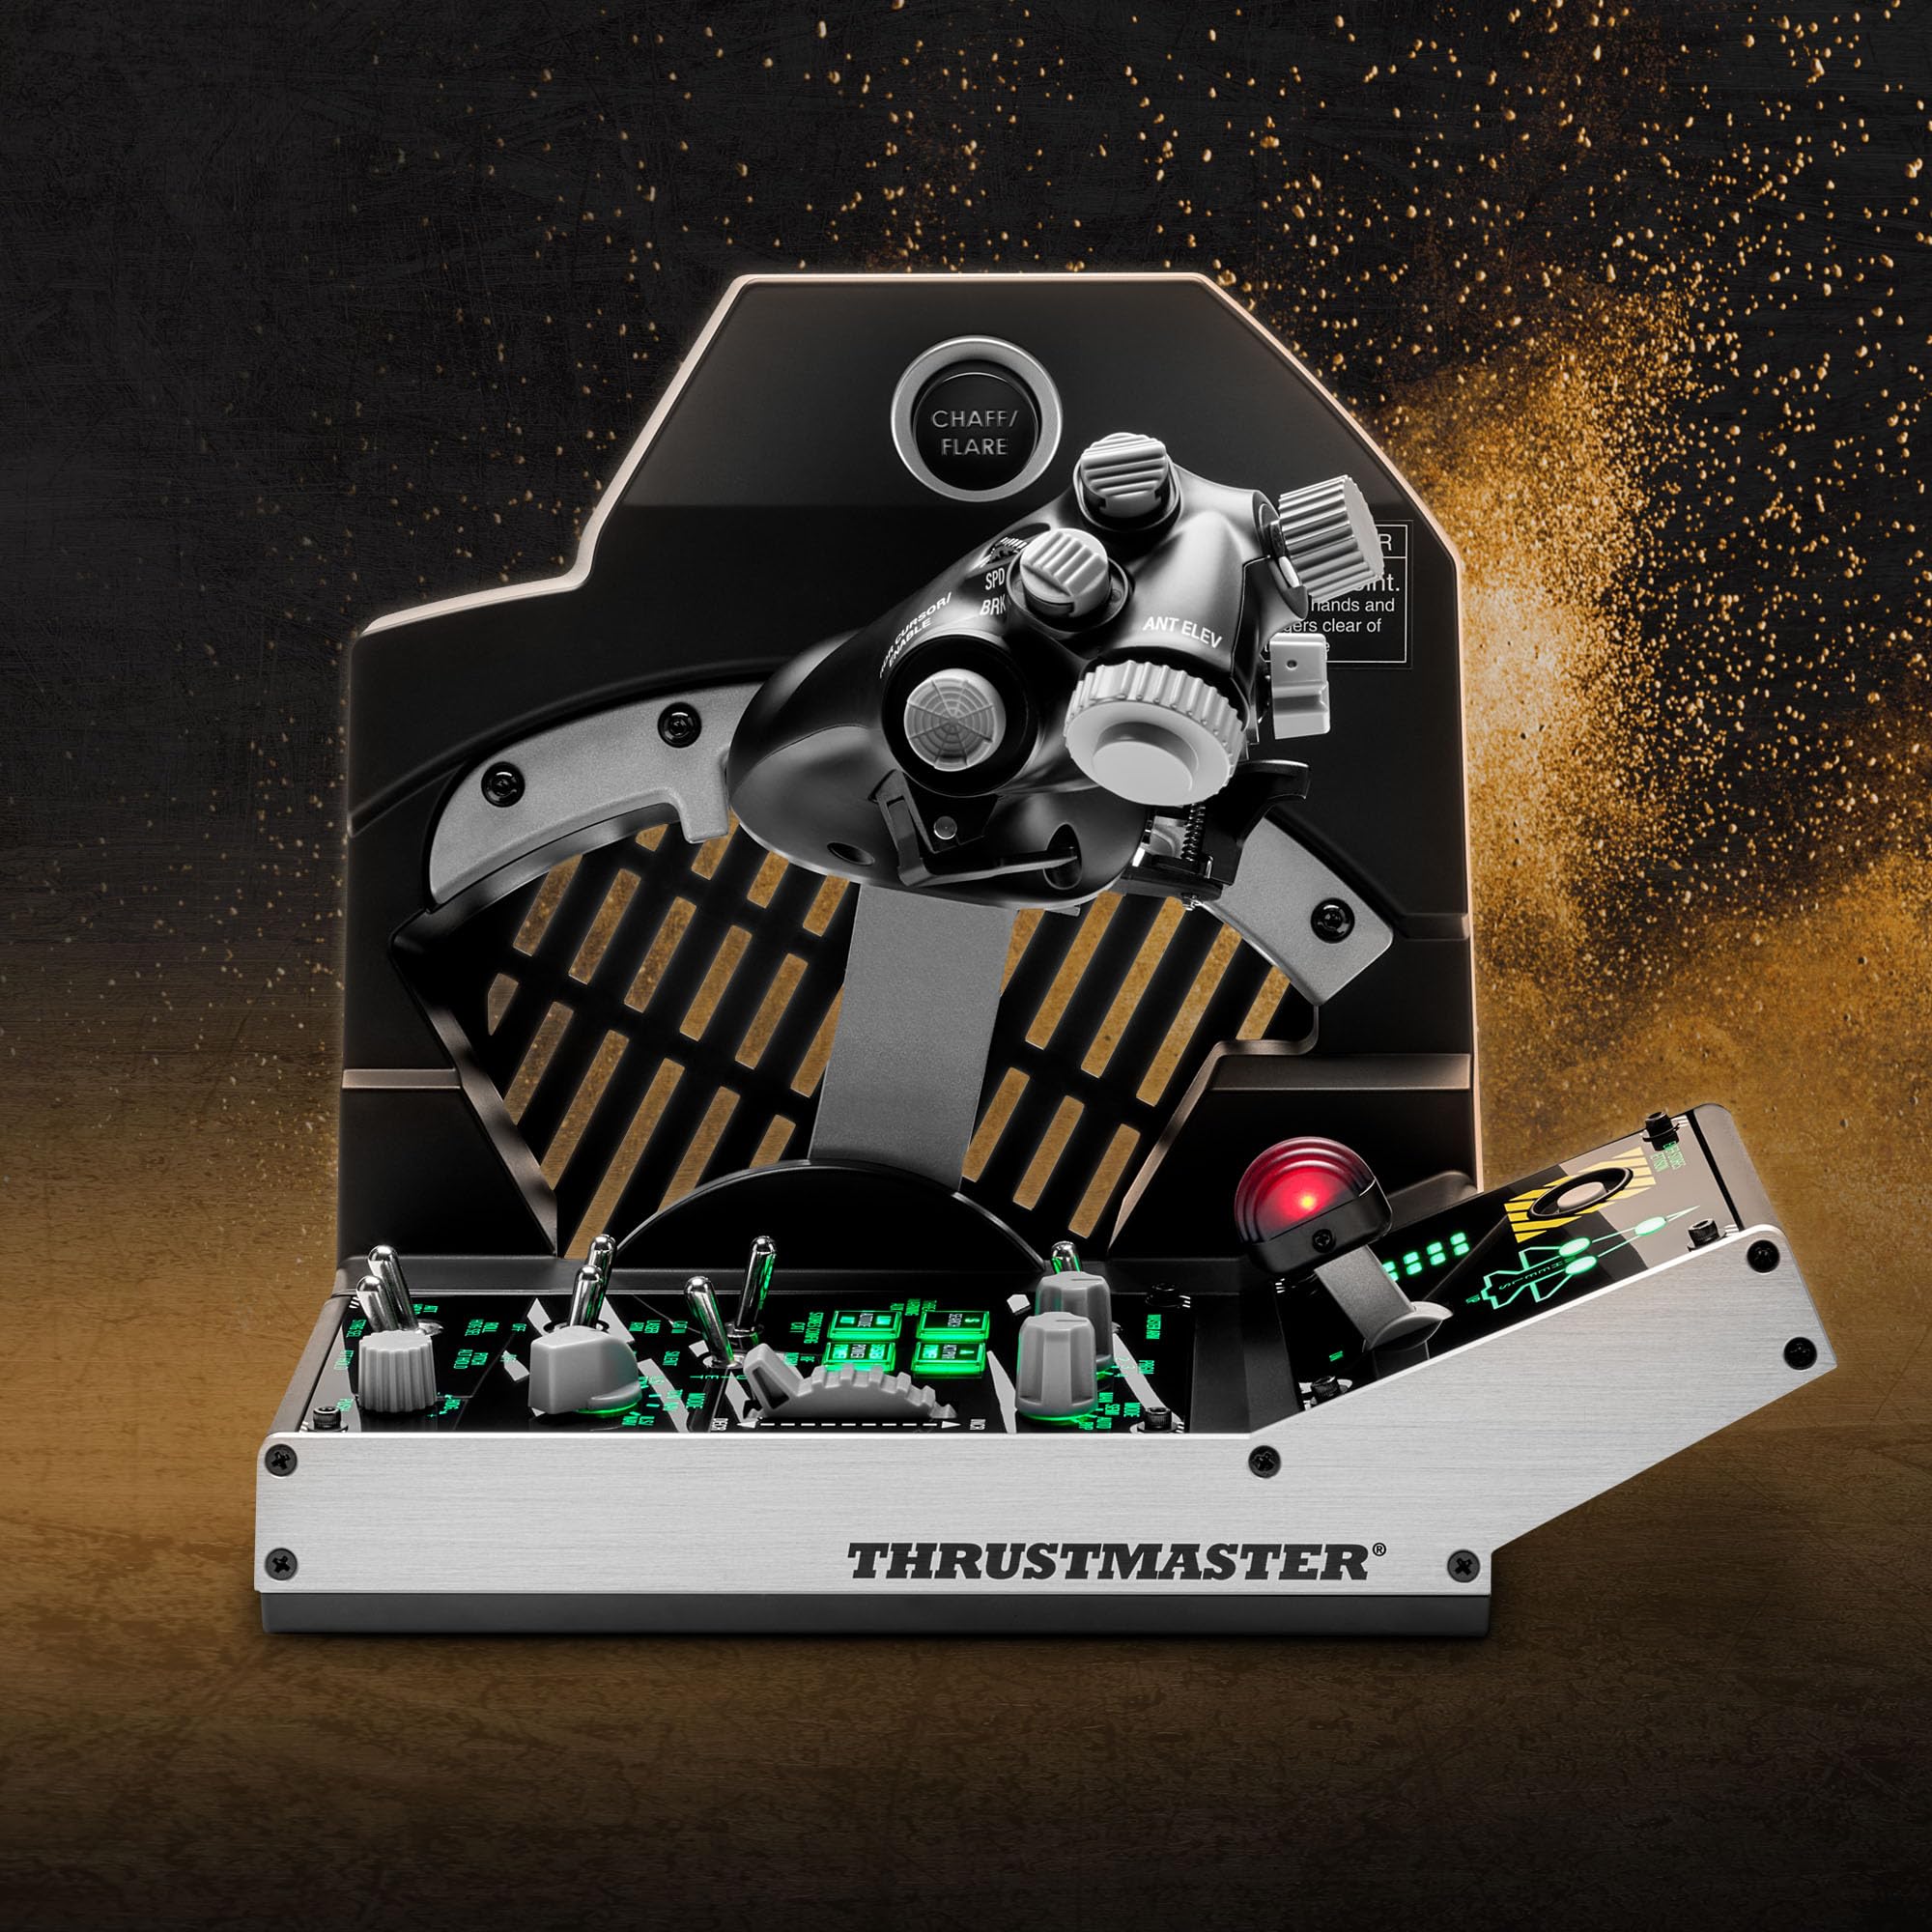 Thrustmaster Viper TQS Mission Pack: Metal Throttle Quadrant System, Throttle and Control Panel Included, 64 Action Buttons, 6 Axes, Licensed by the U.S. Air Force (PC)